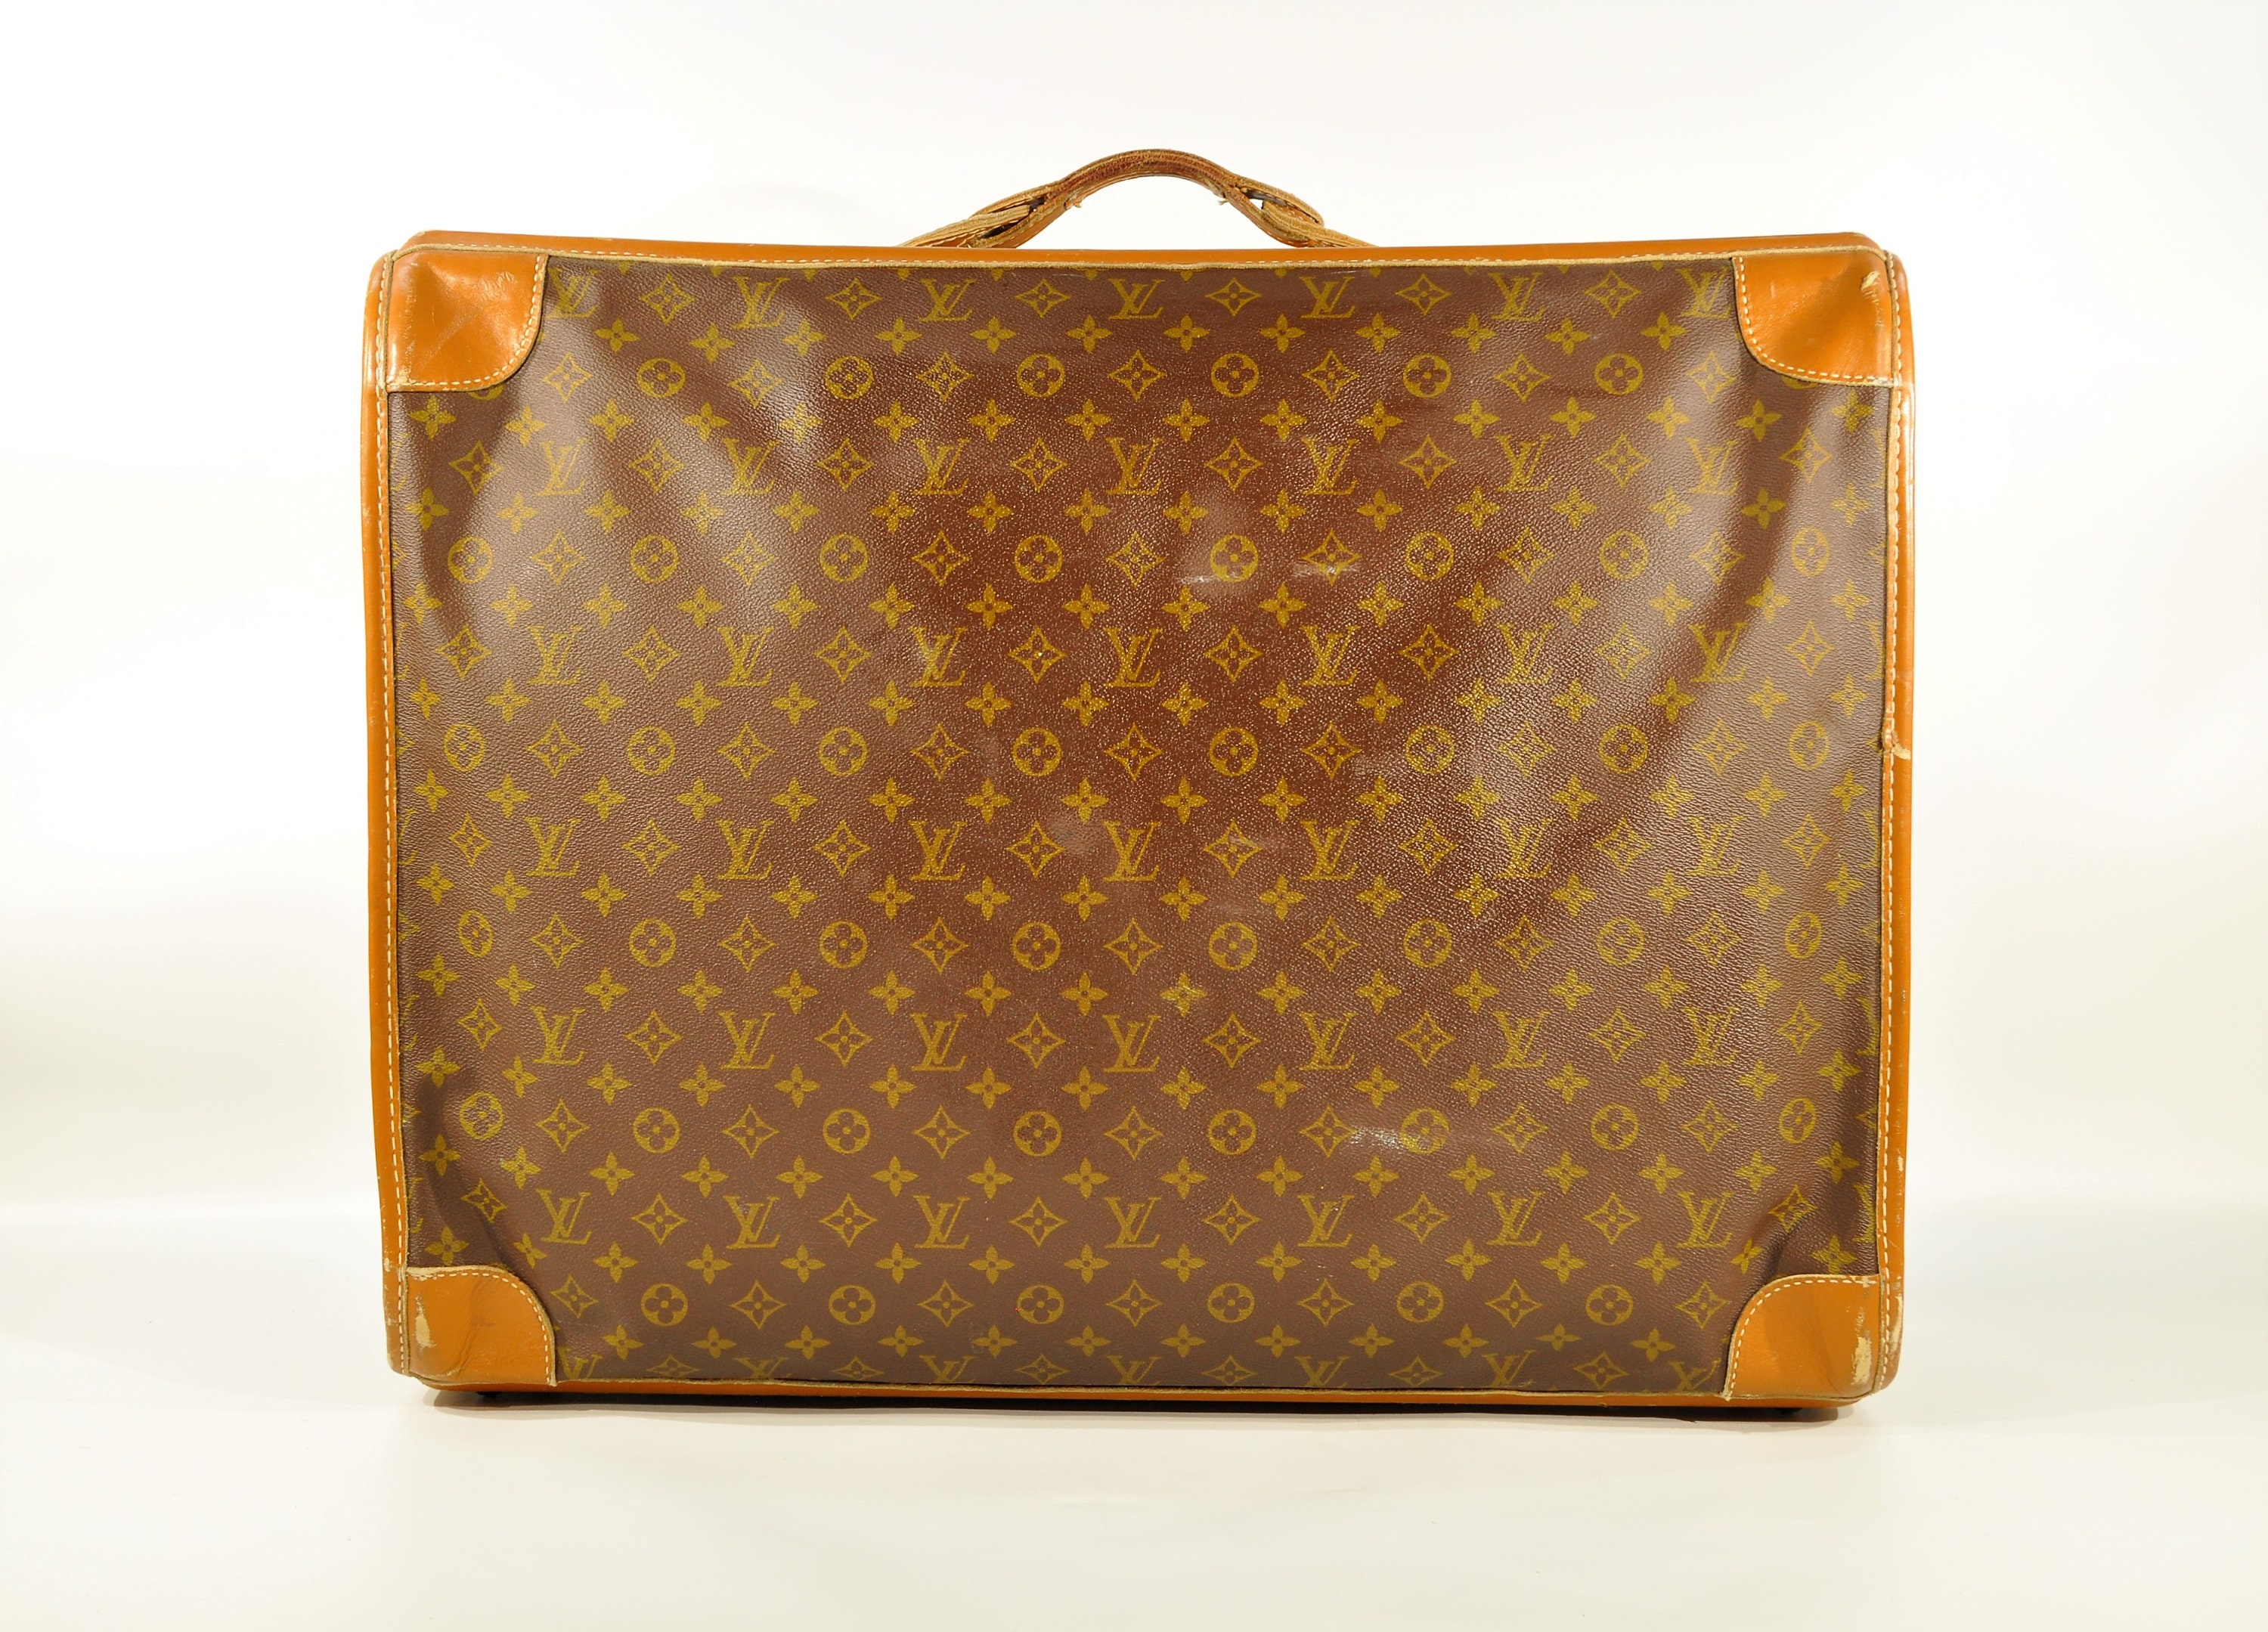 1970s Louis Vuitton Brown Beige Canvas Leather Suitcase Luggage Pullman 75